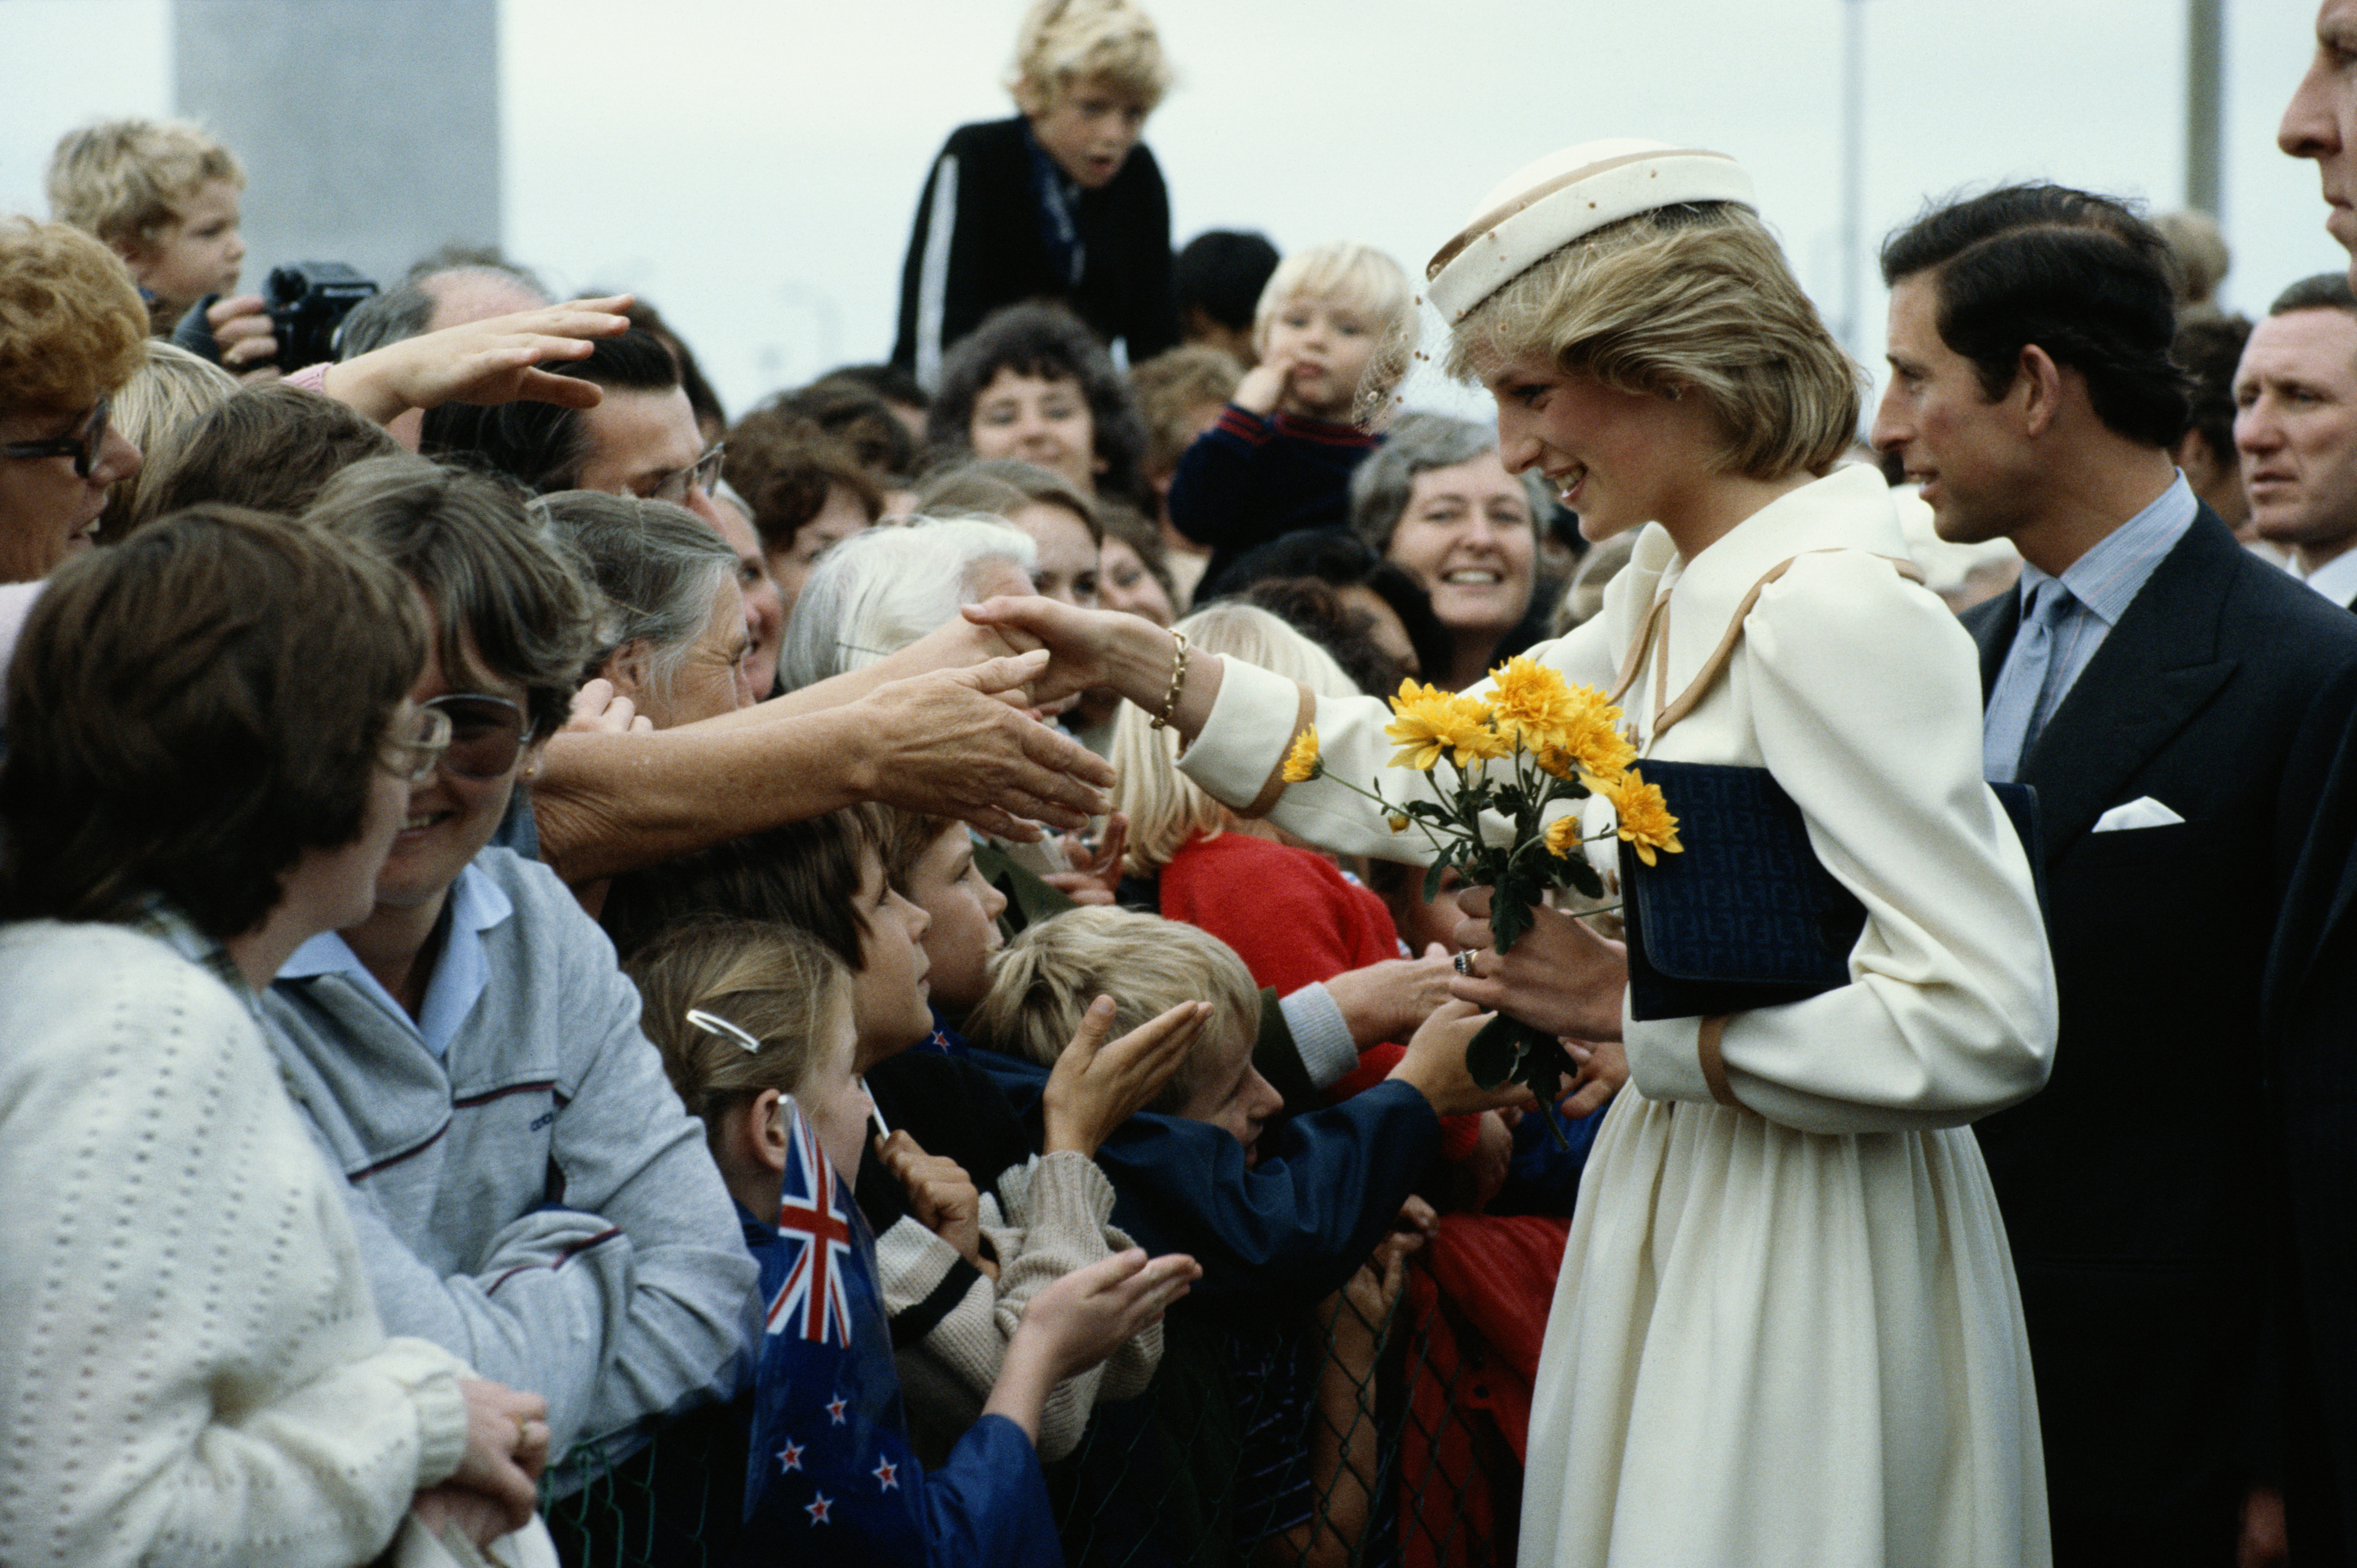 Late Princess Diana and King Charles III meet the crowd on April 17, 1983, during their arrival in Auckland, New Zealand. | Source: Getty Images